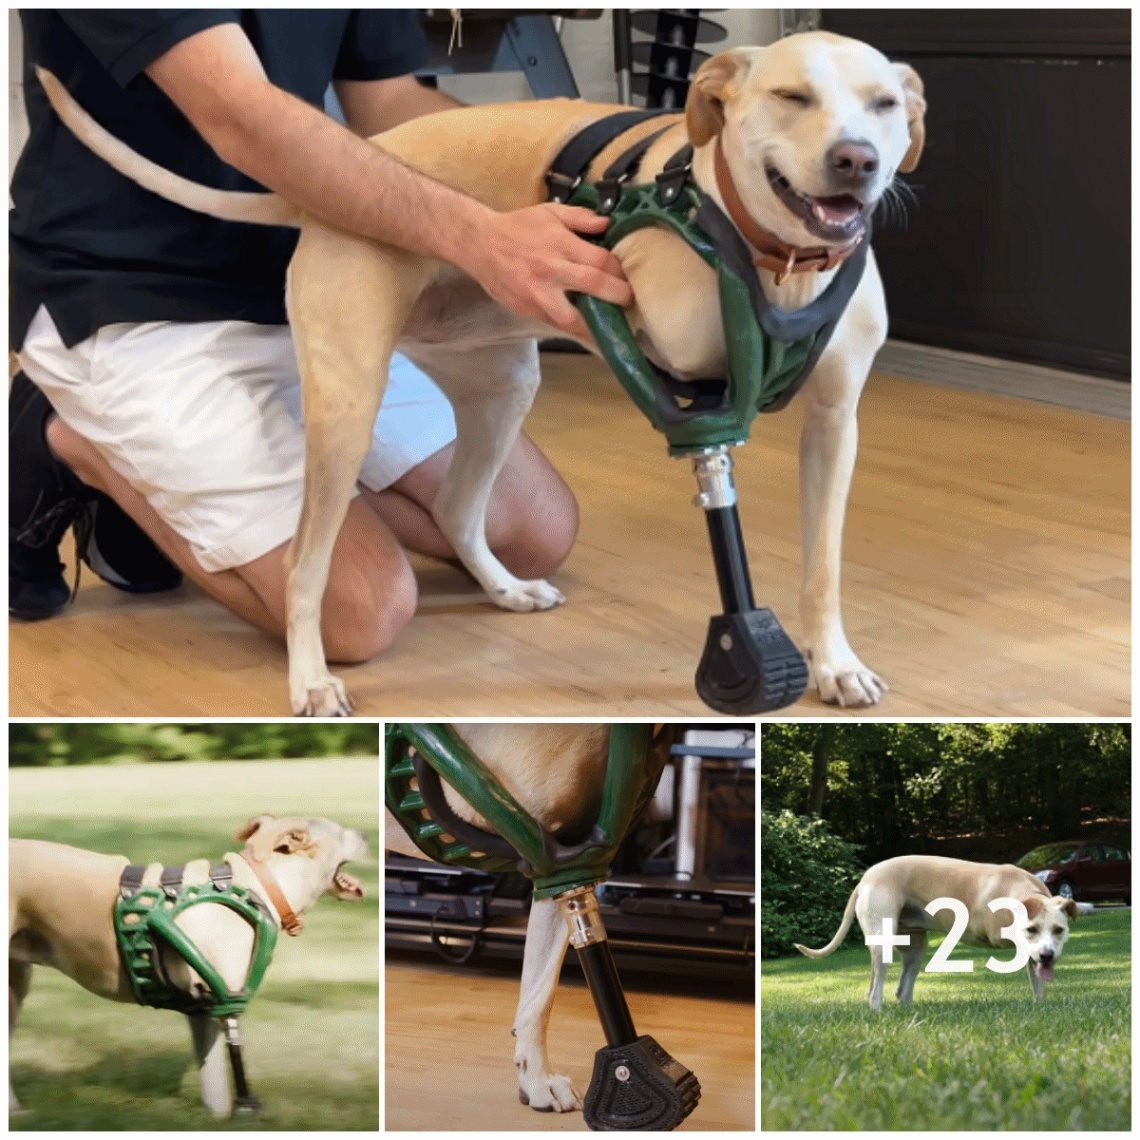 The dog lives happily with his prosthetics and always brings positive energy to everyone.